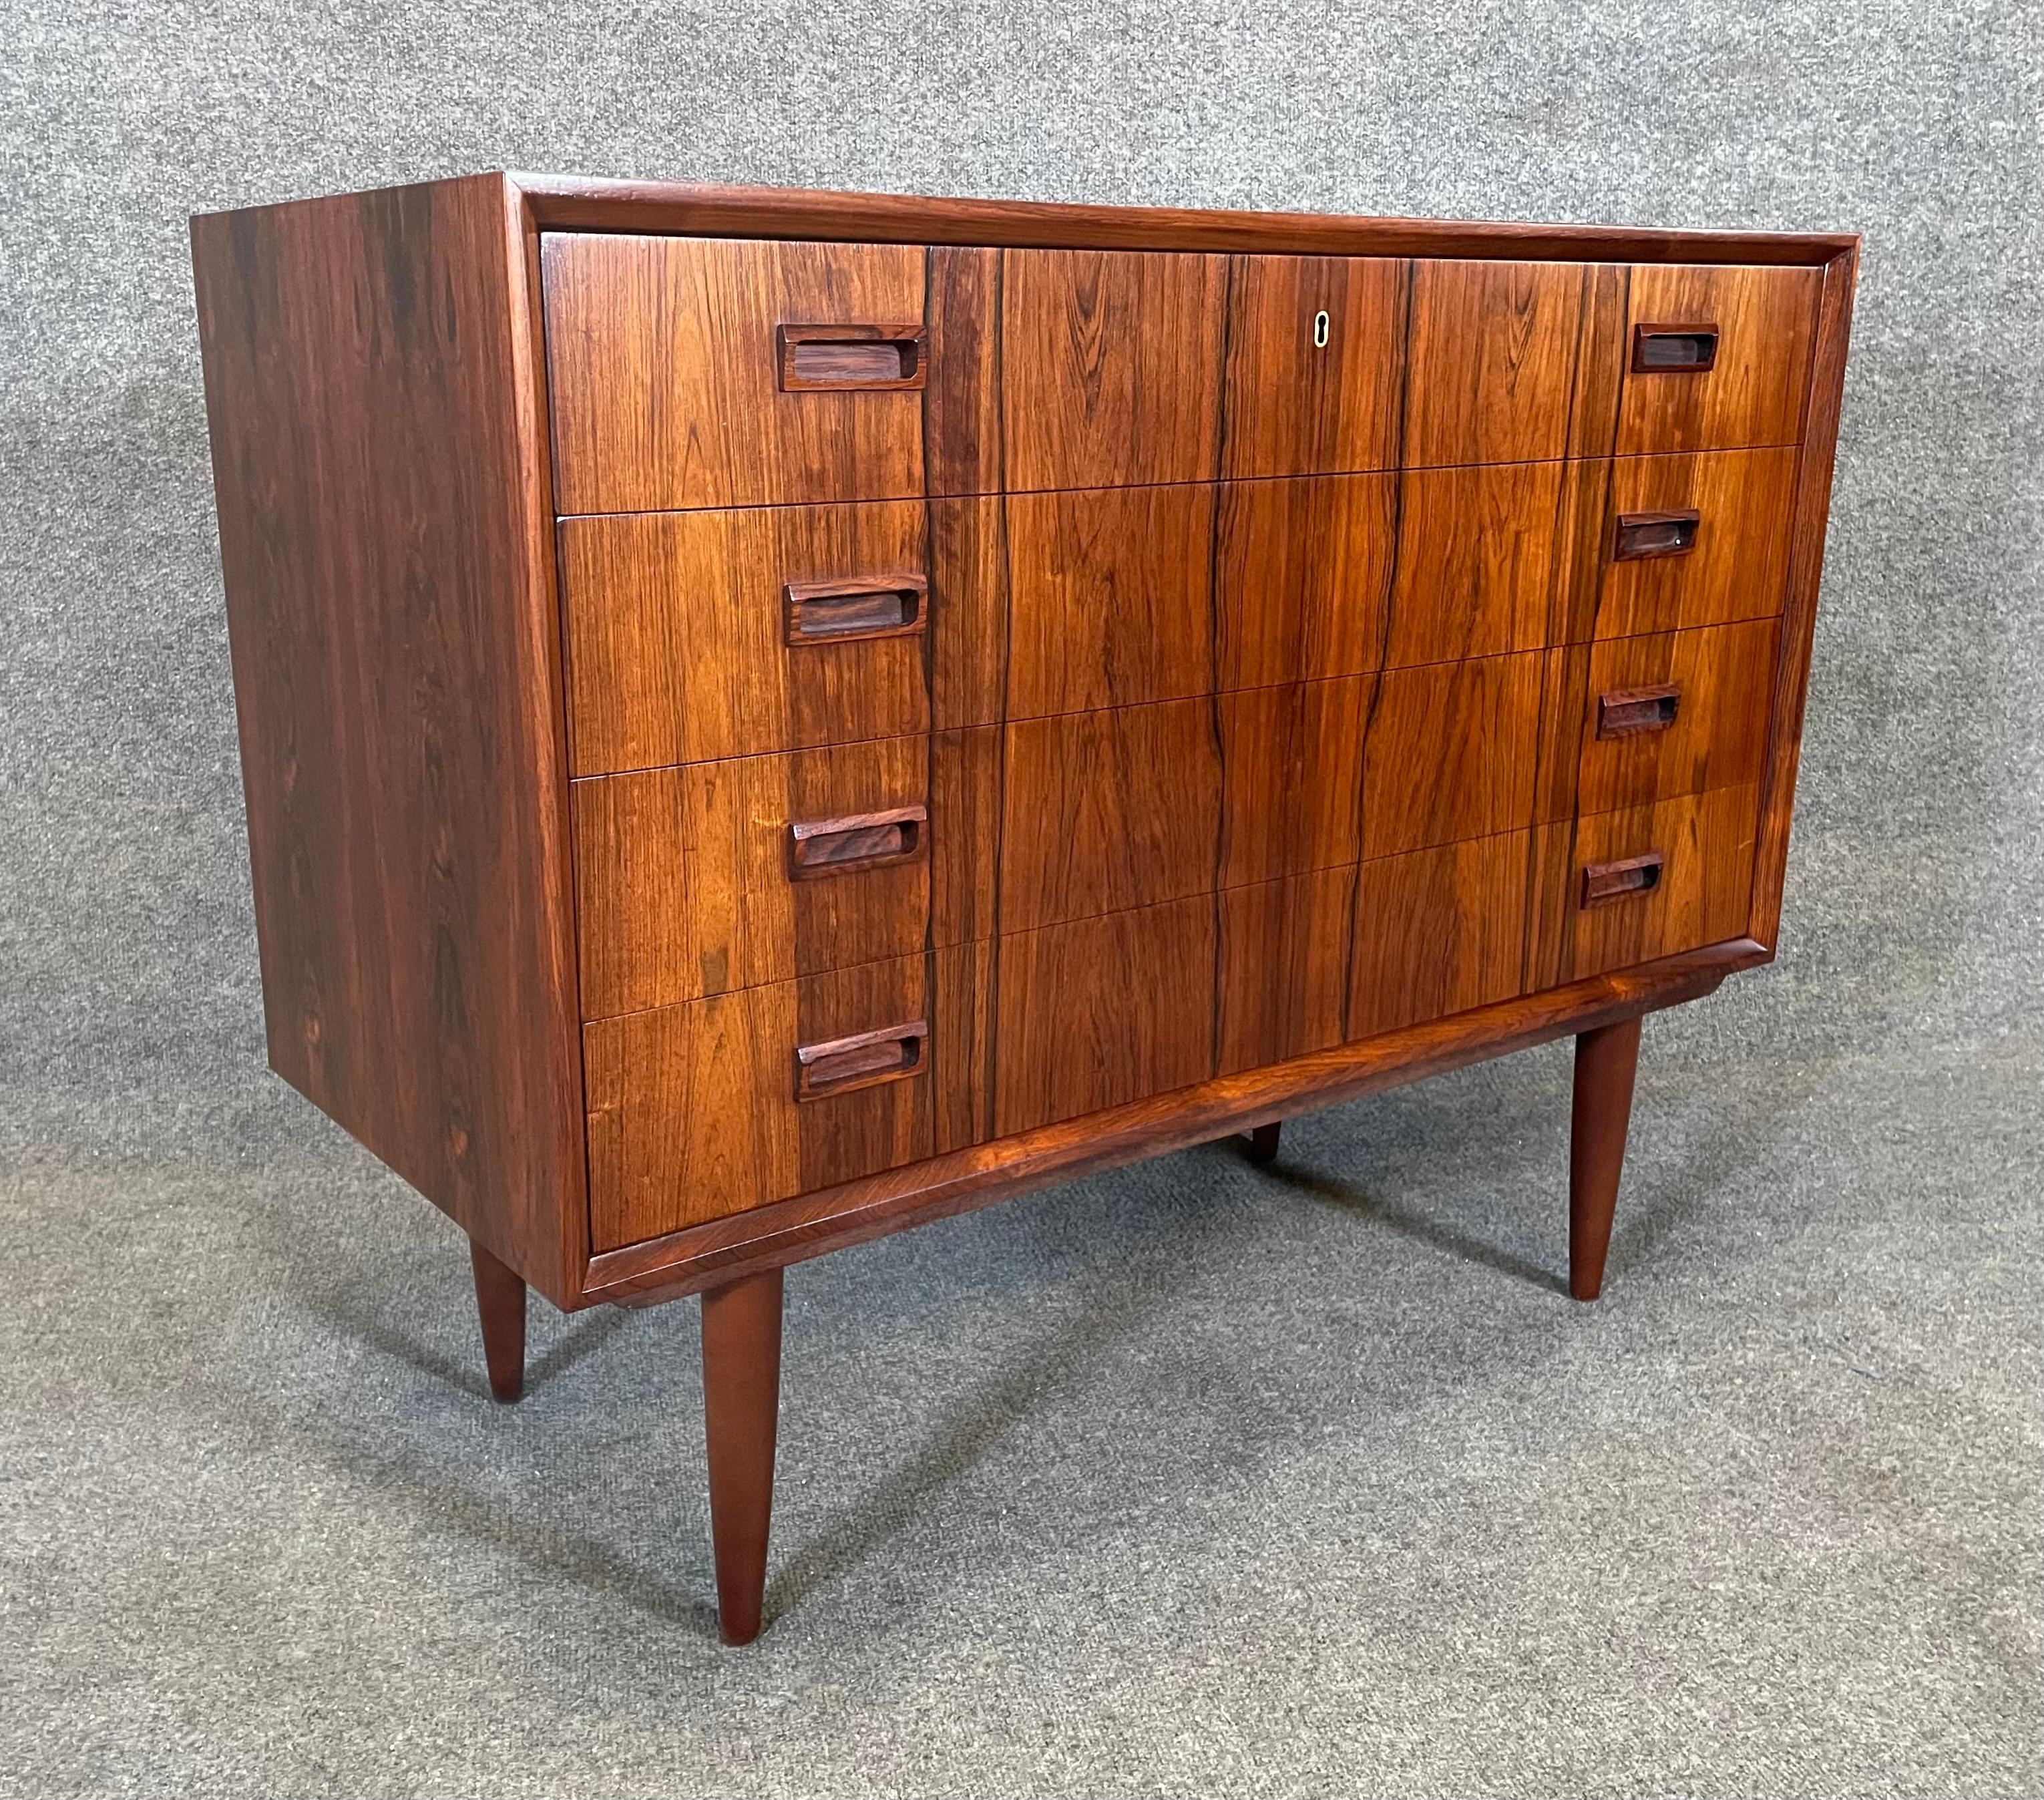 Here is a beautiful scandinavian modern chest of drawers in rosewood manufactured in Denmark in the 1960's.
This lovey case piece, recently imported from Europe to California before its refinishing, features a vibrant wood grain, a set of four dove